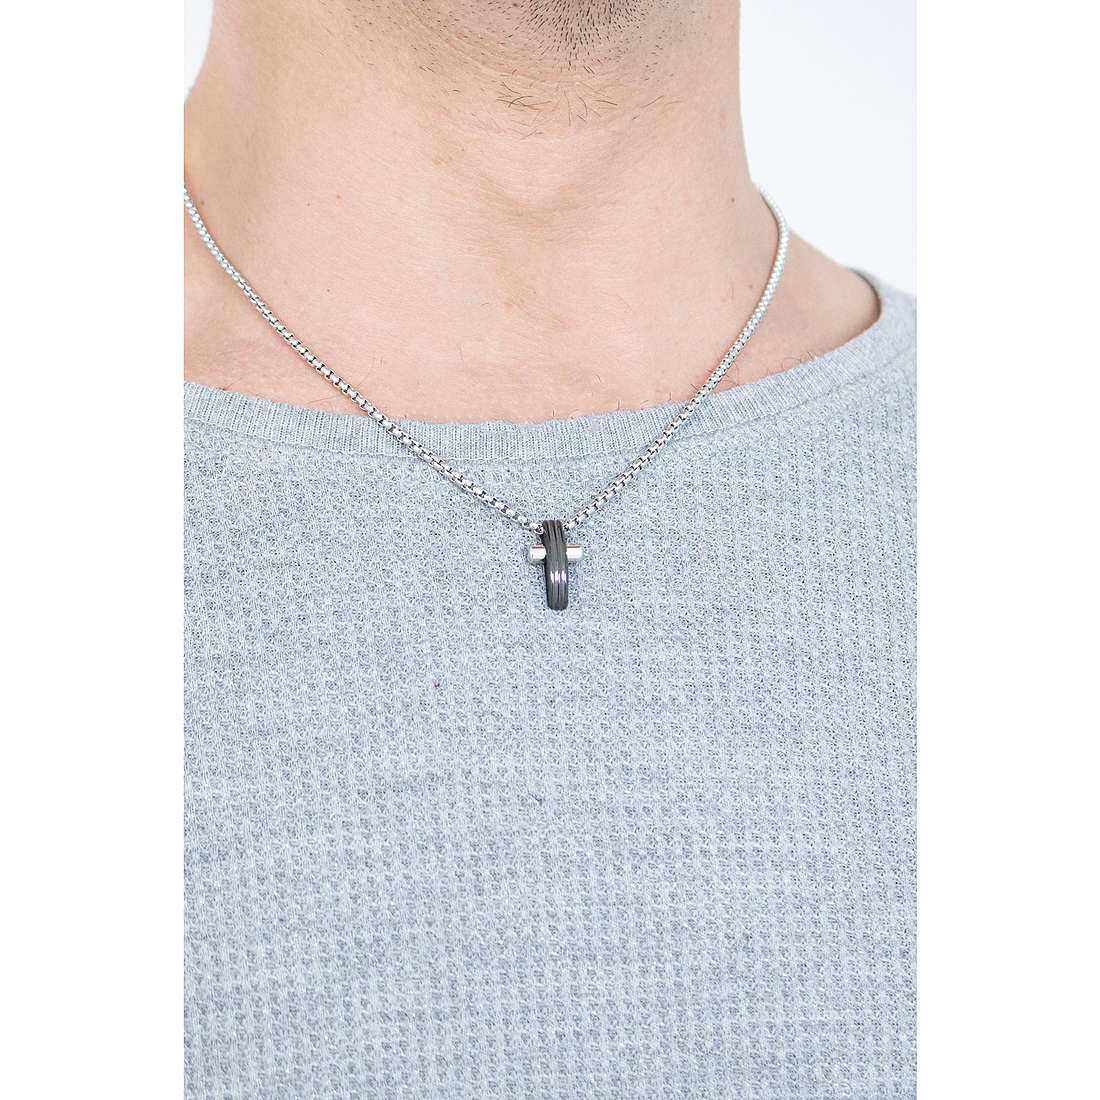 Brosway necklaces Crux man BRX08 wearing